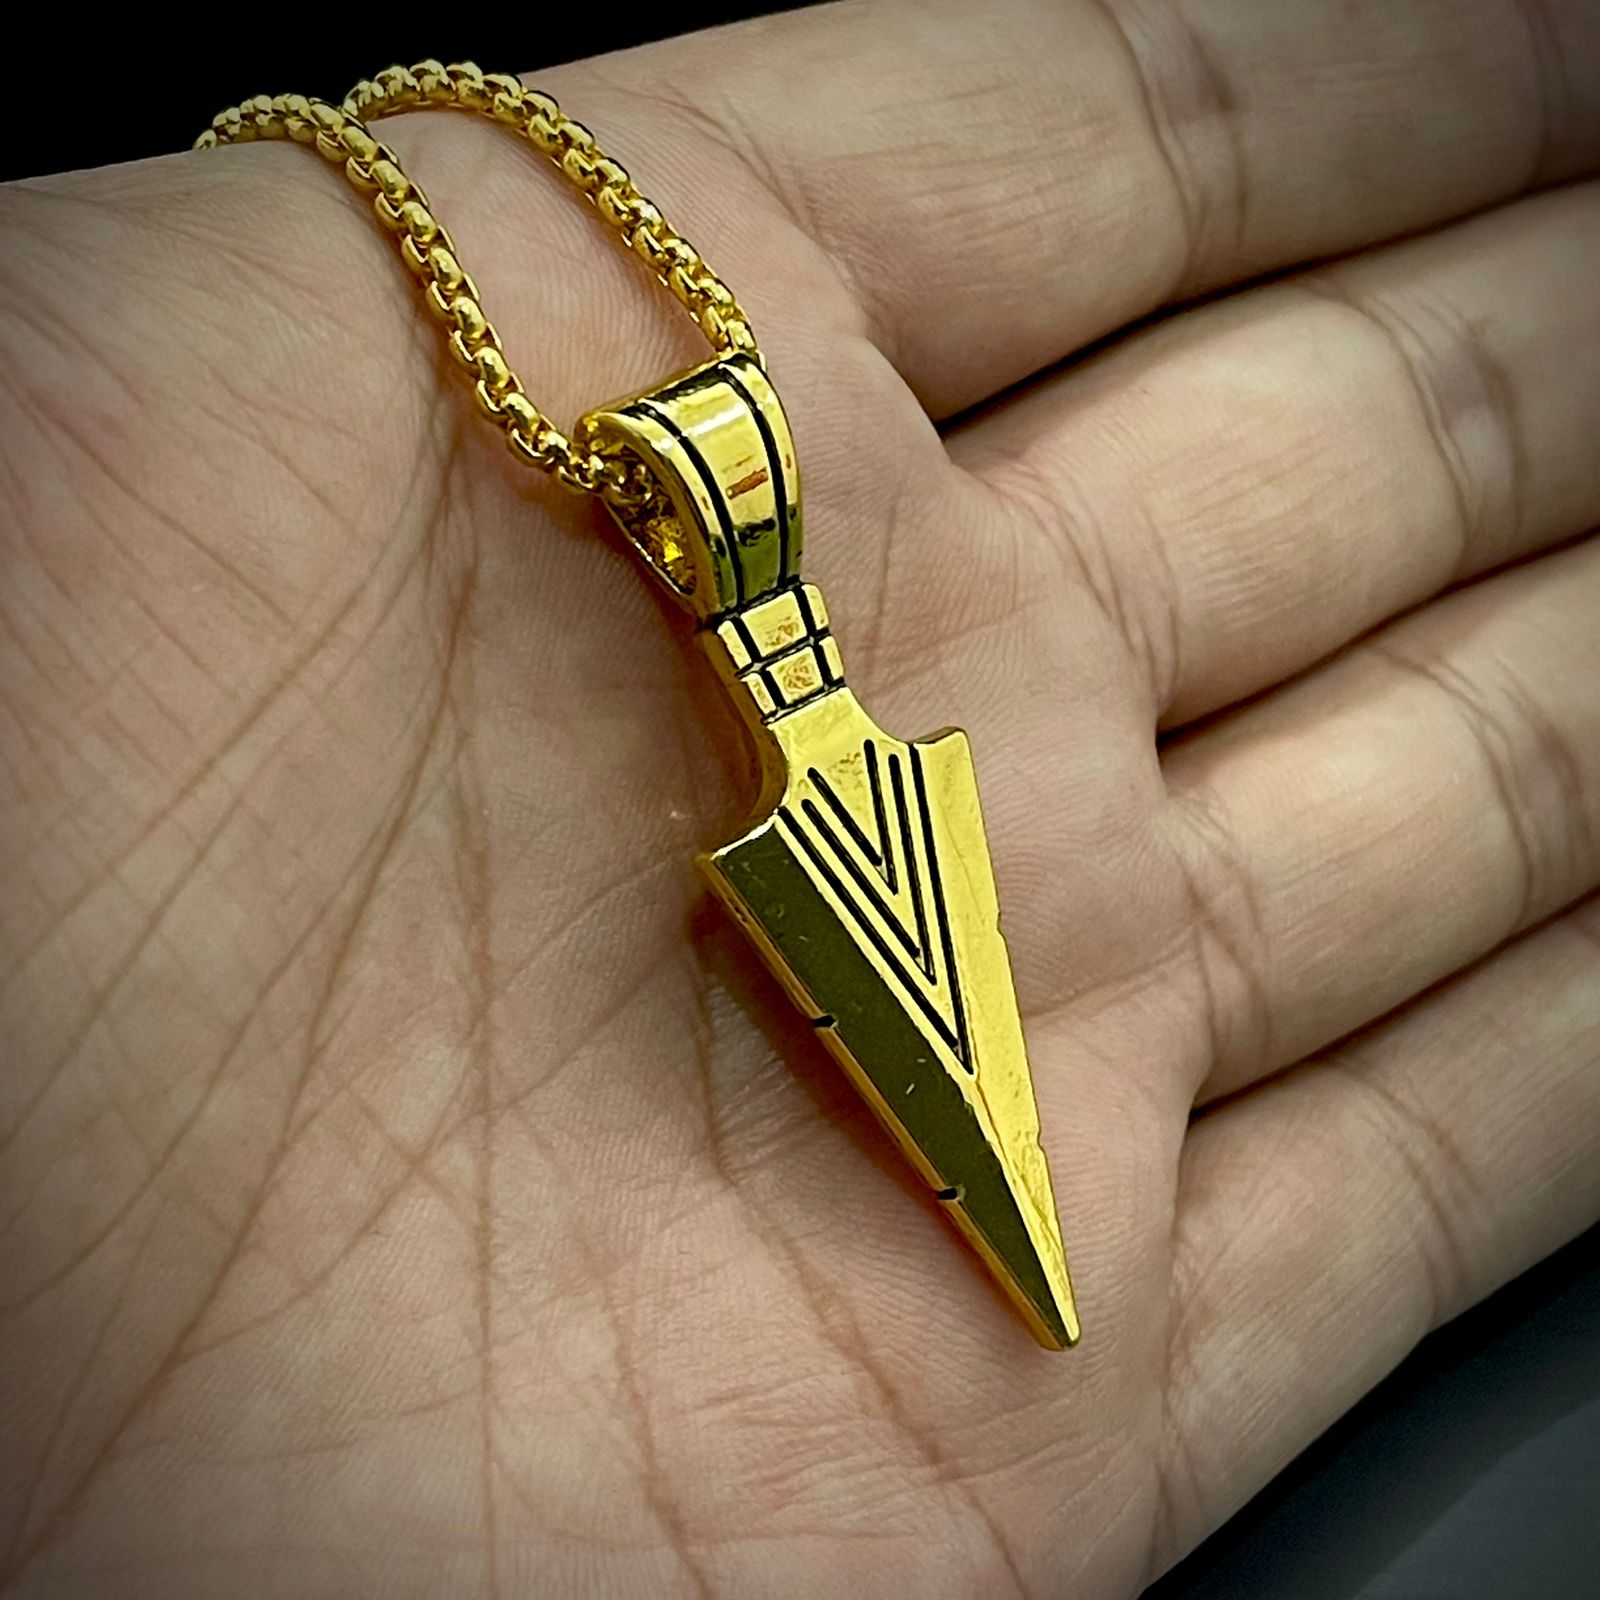 Buy COLOUR OUR DREAMS Men's Fashion Jewellery Solid Spear Point Arrowhead  Pendant Necklace With Chain For Boys and Men PD1000875 at Amazon.in